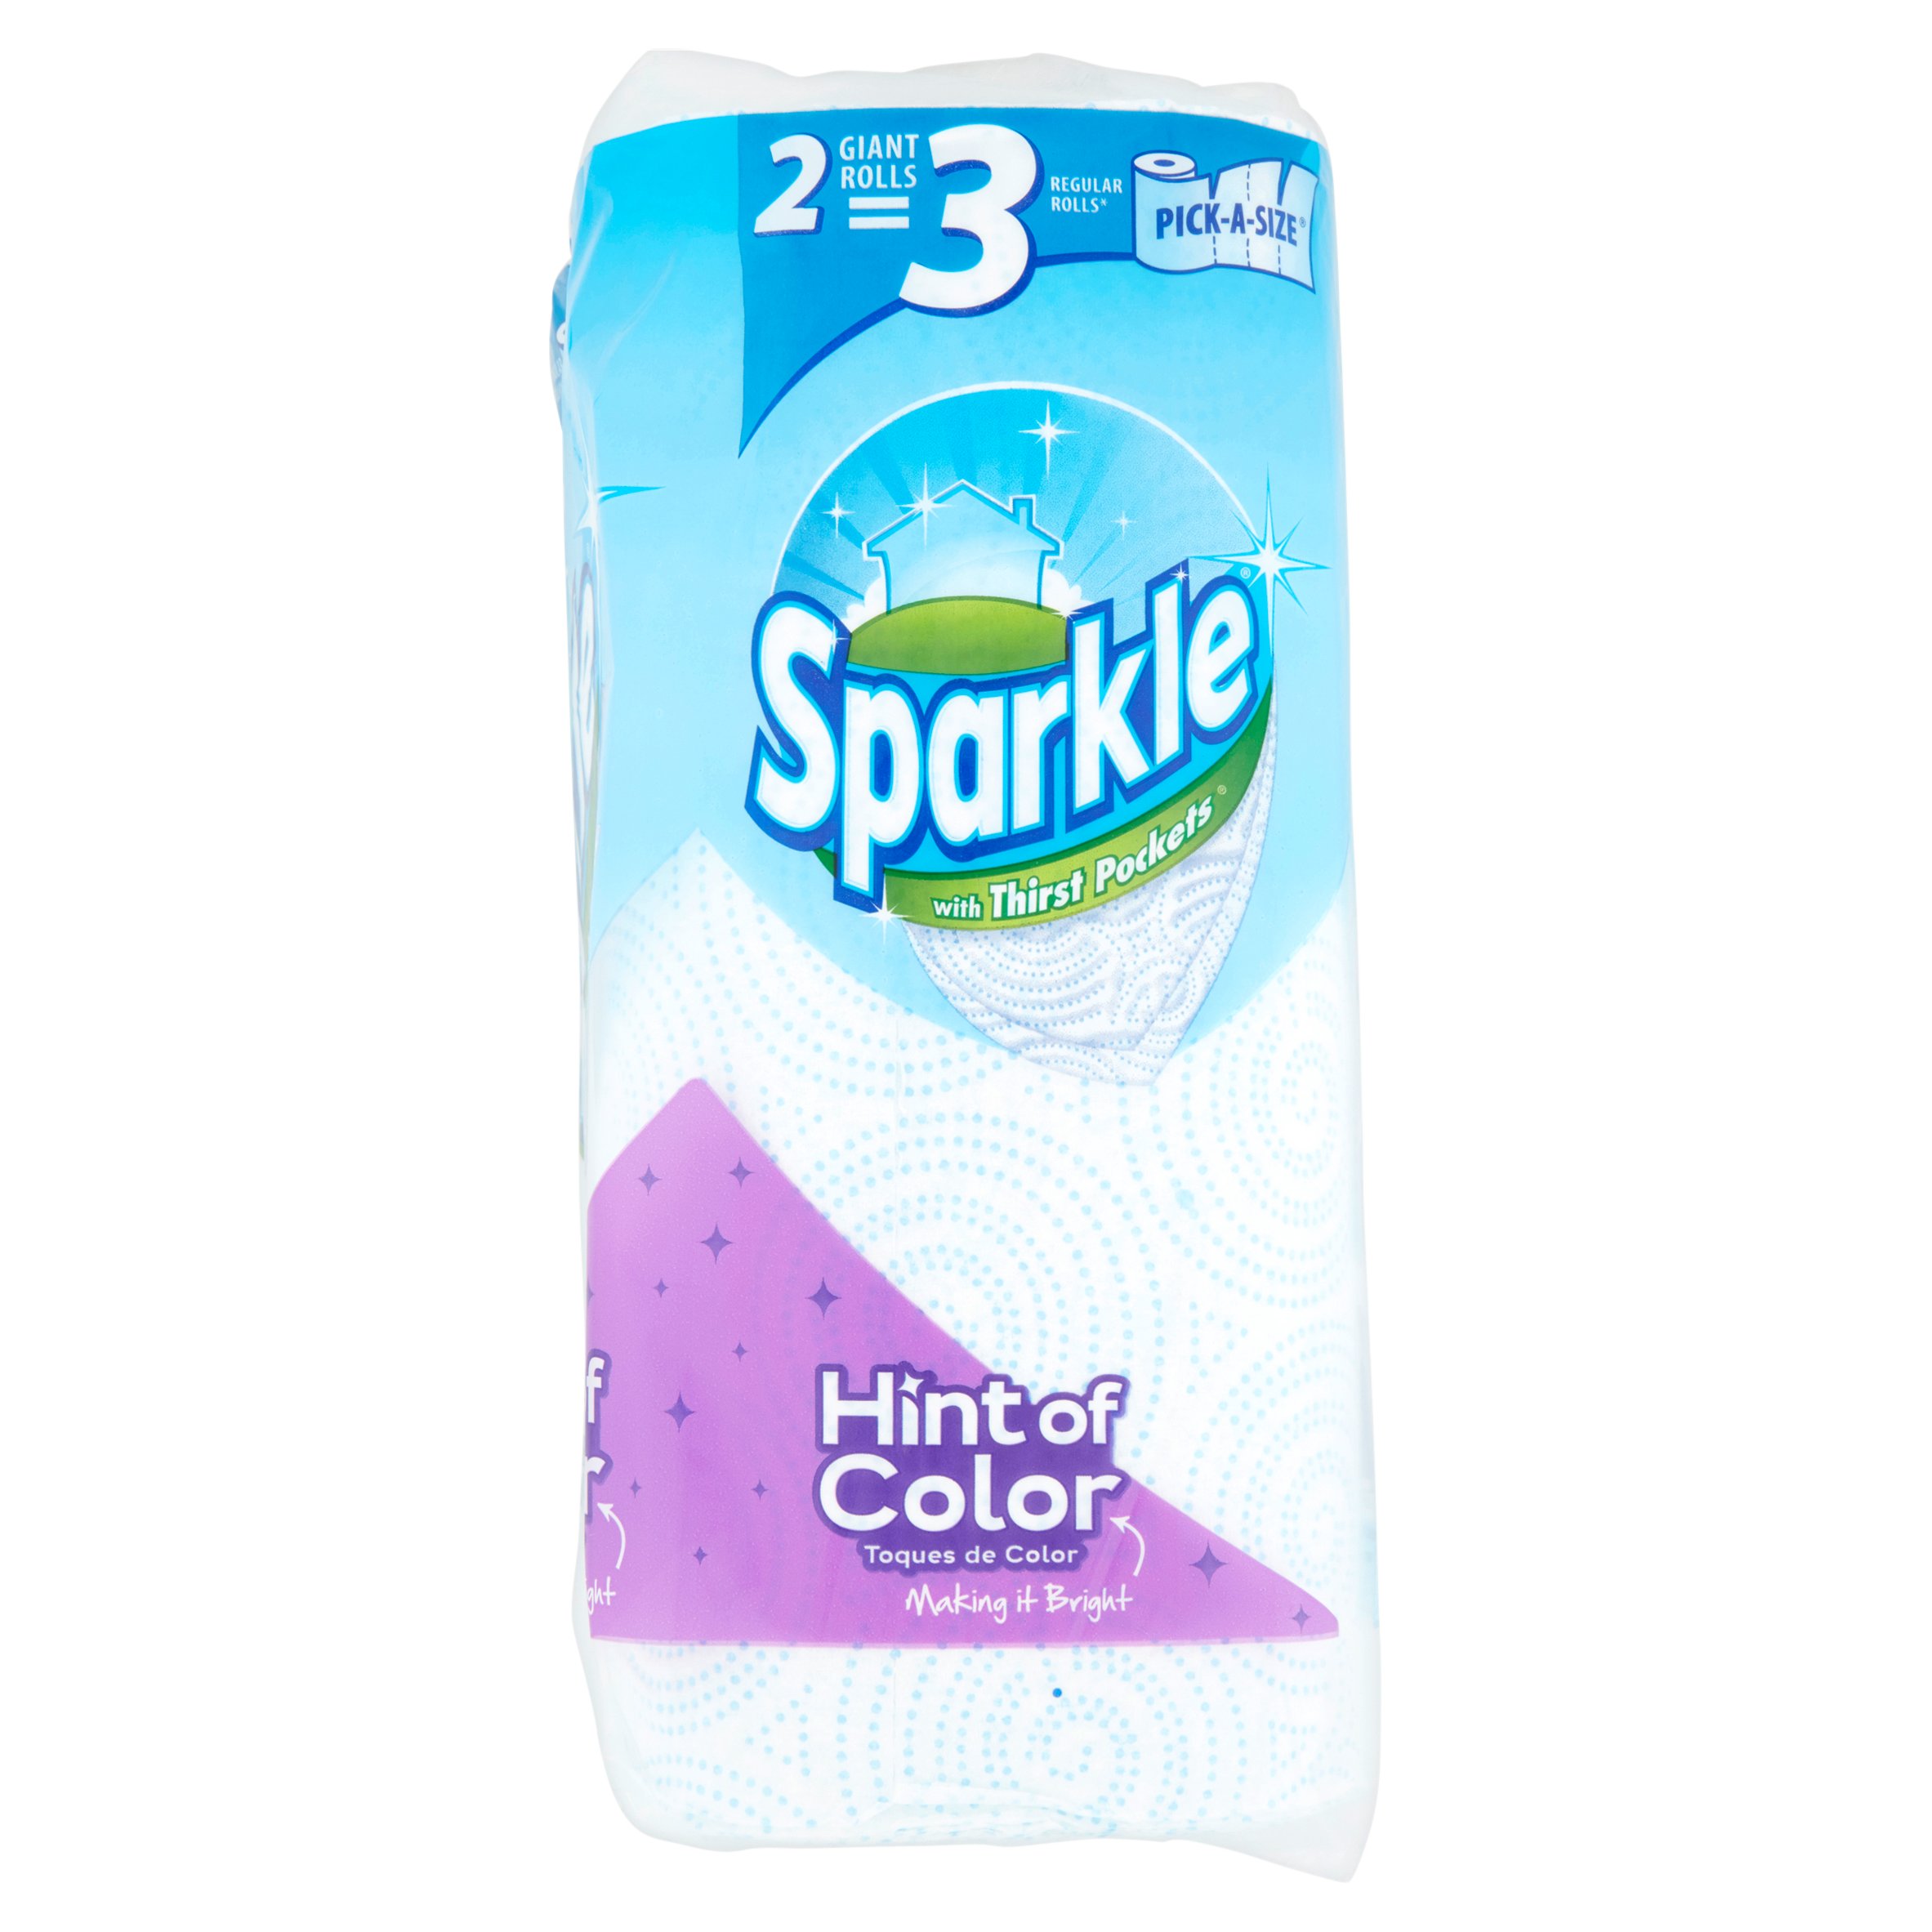 Sparkle Paper Towels with Thirst Pockets Rolls, 2 count - image 5 of 5